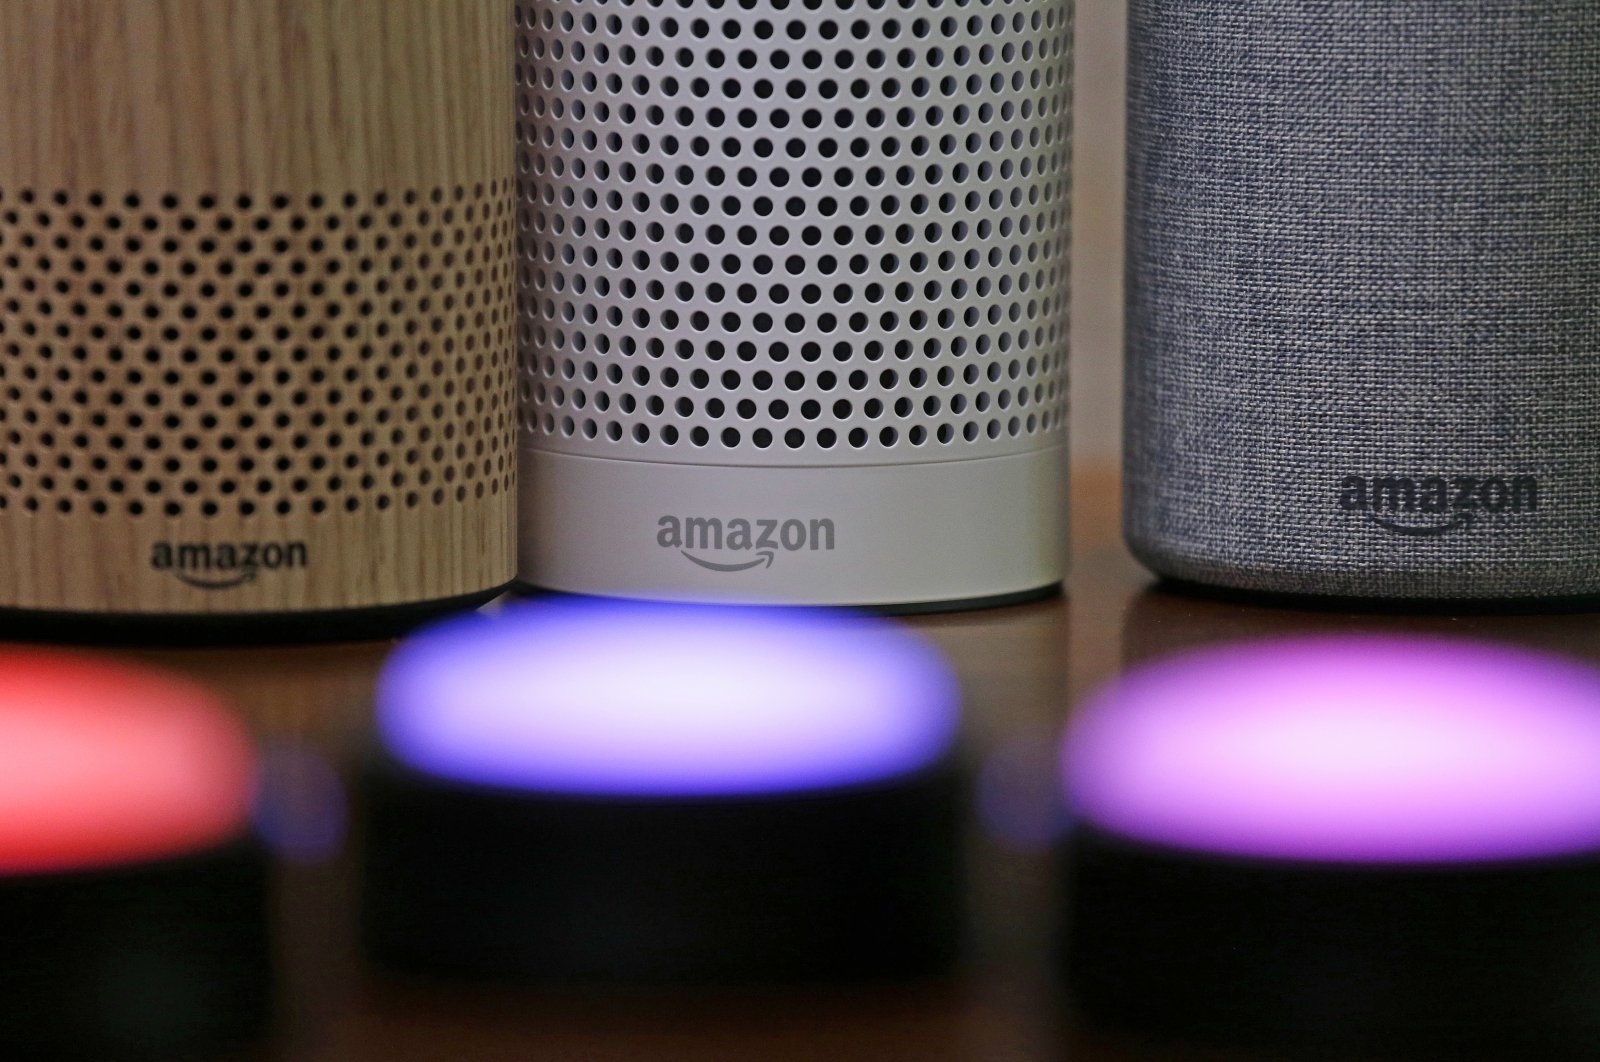 Amazon Echo and Echo Plus devices sit near illuminated Echo Button devices during an event by the company in Seattle, Washington, U.S., Sept. 27, 2017. (AP File Photo)